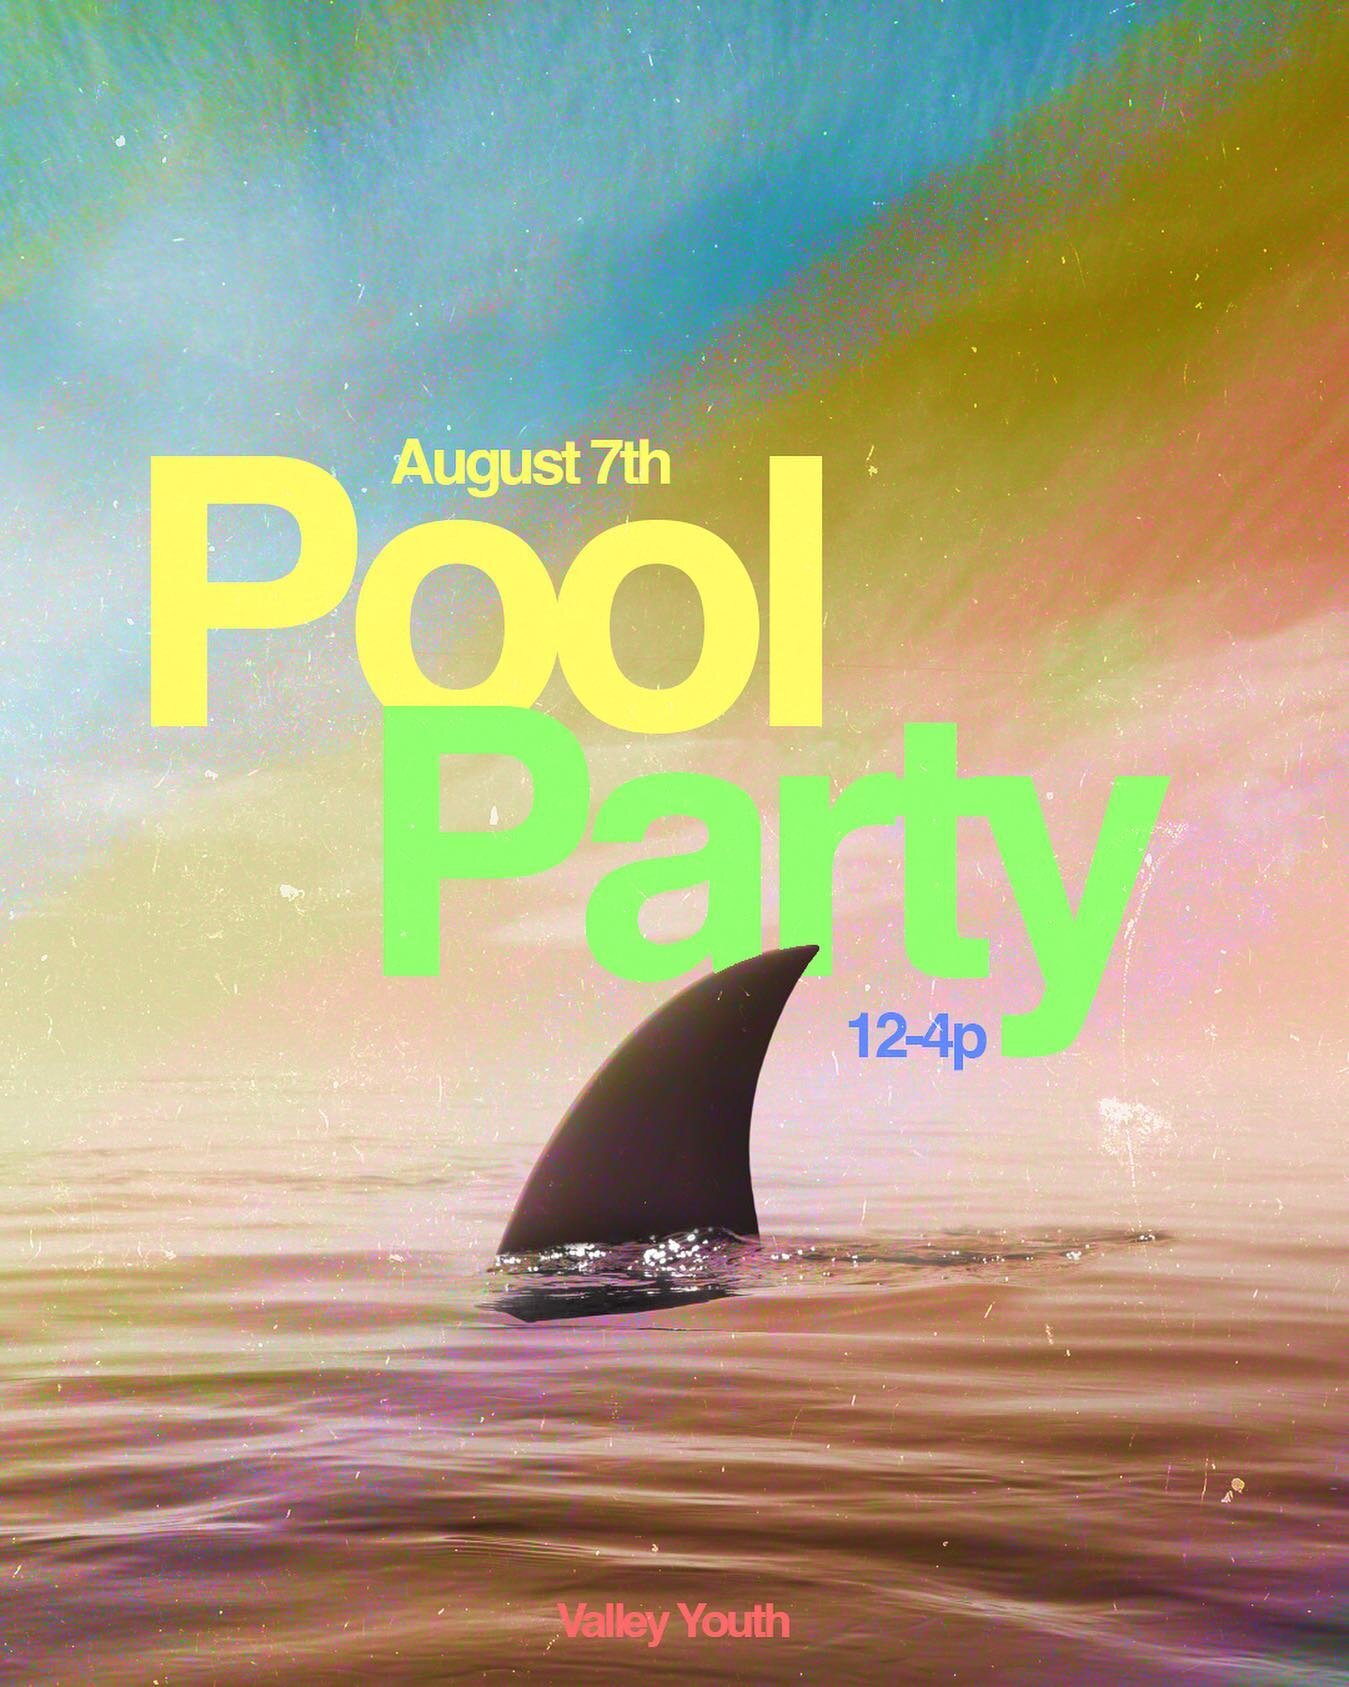 Valley Youth! There&rsquo;s a cool party pool party make you want to drool party cause we ain&rsquo;t in school party get there on a mule party this Sunday in Chester! Hit up Colin at colin@valleybiblechurch.com to RSVP and get additional info!